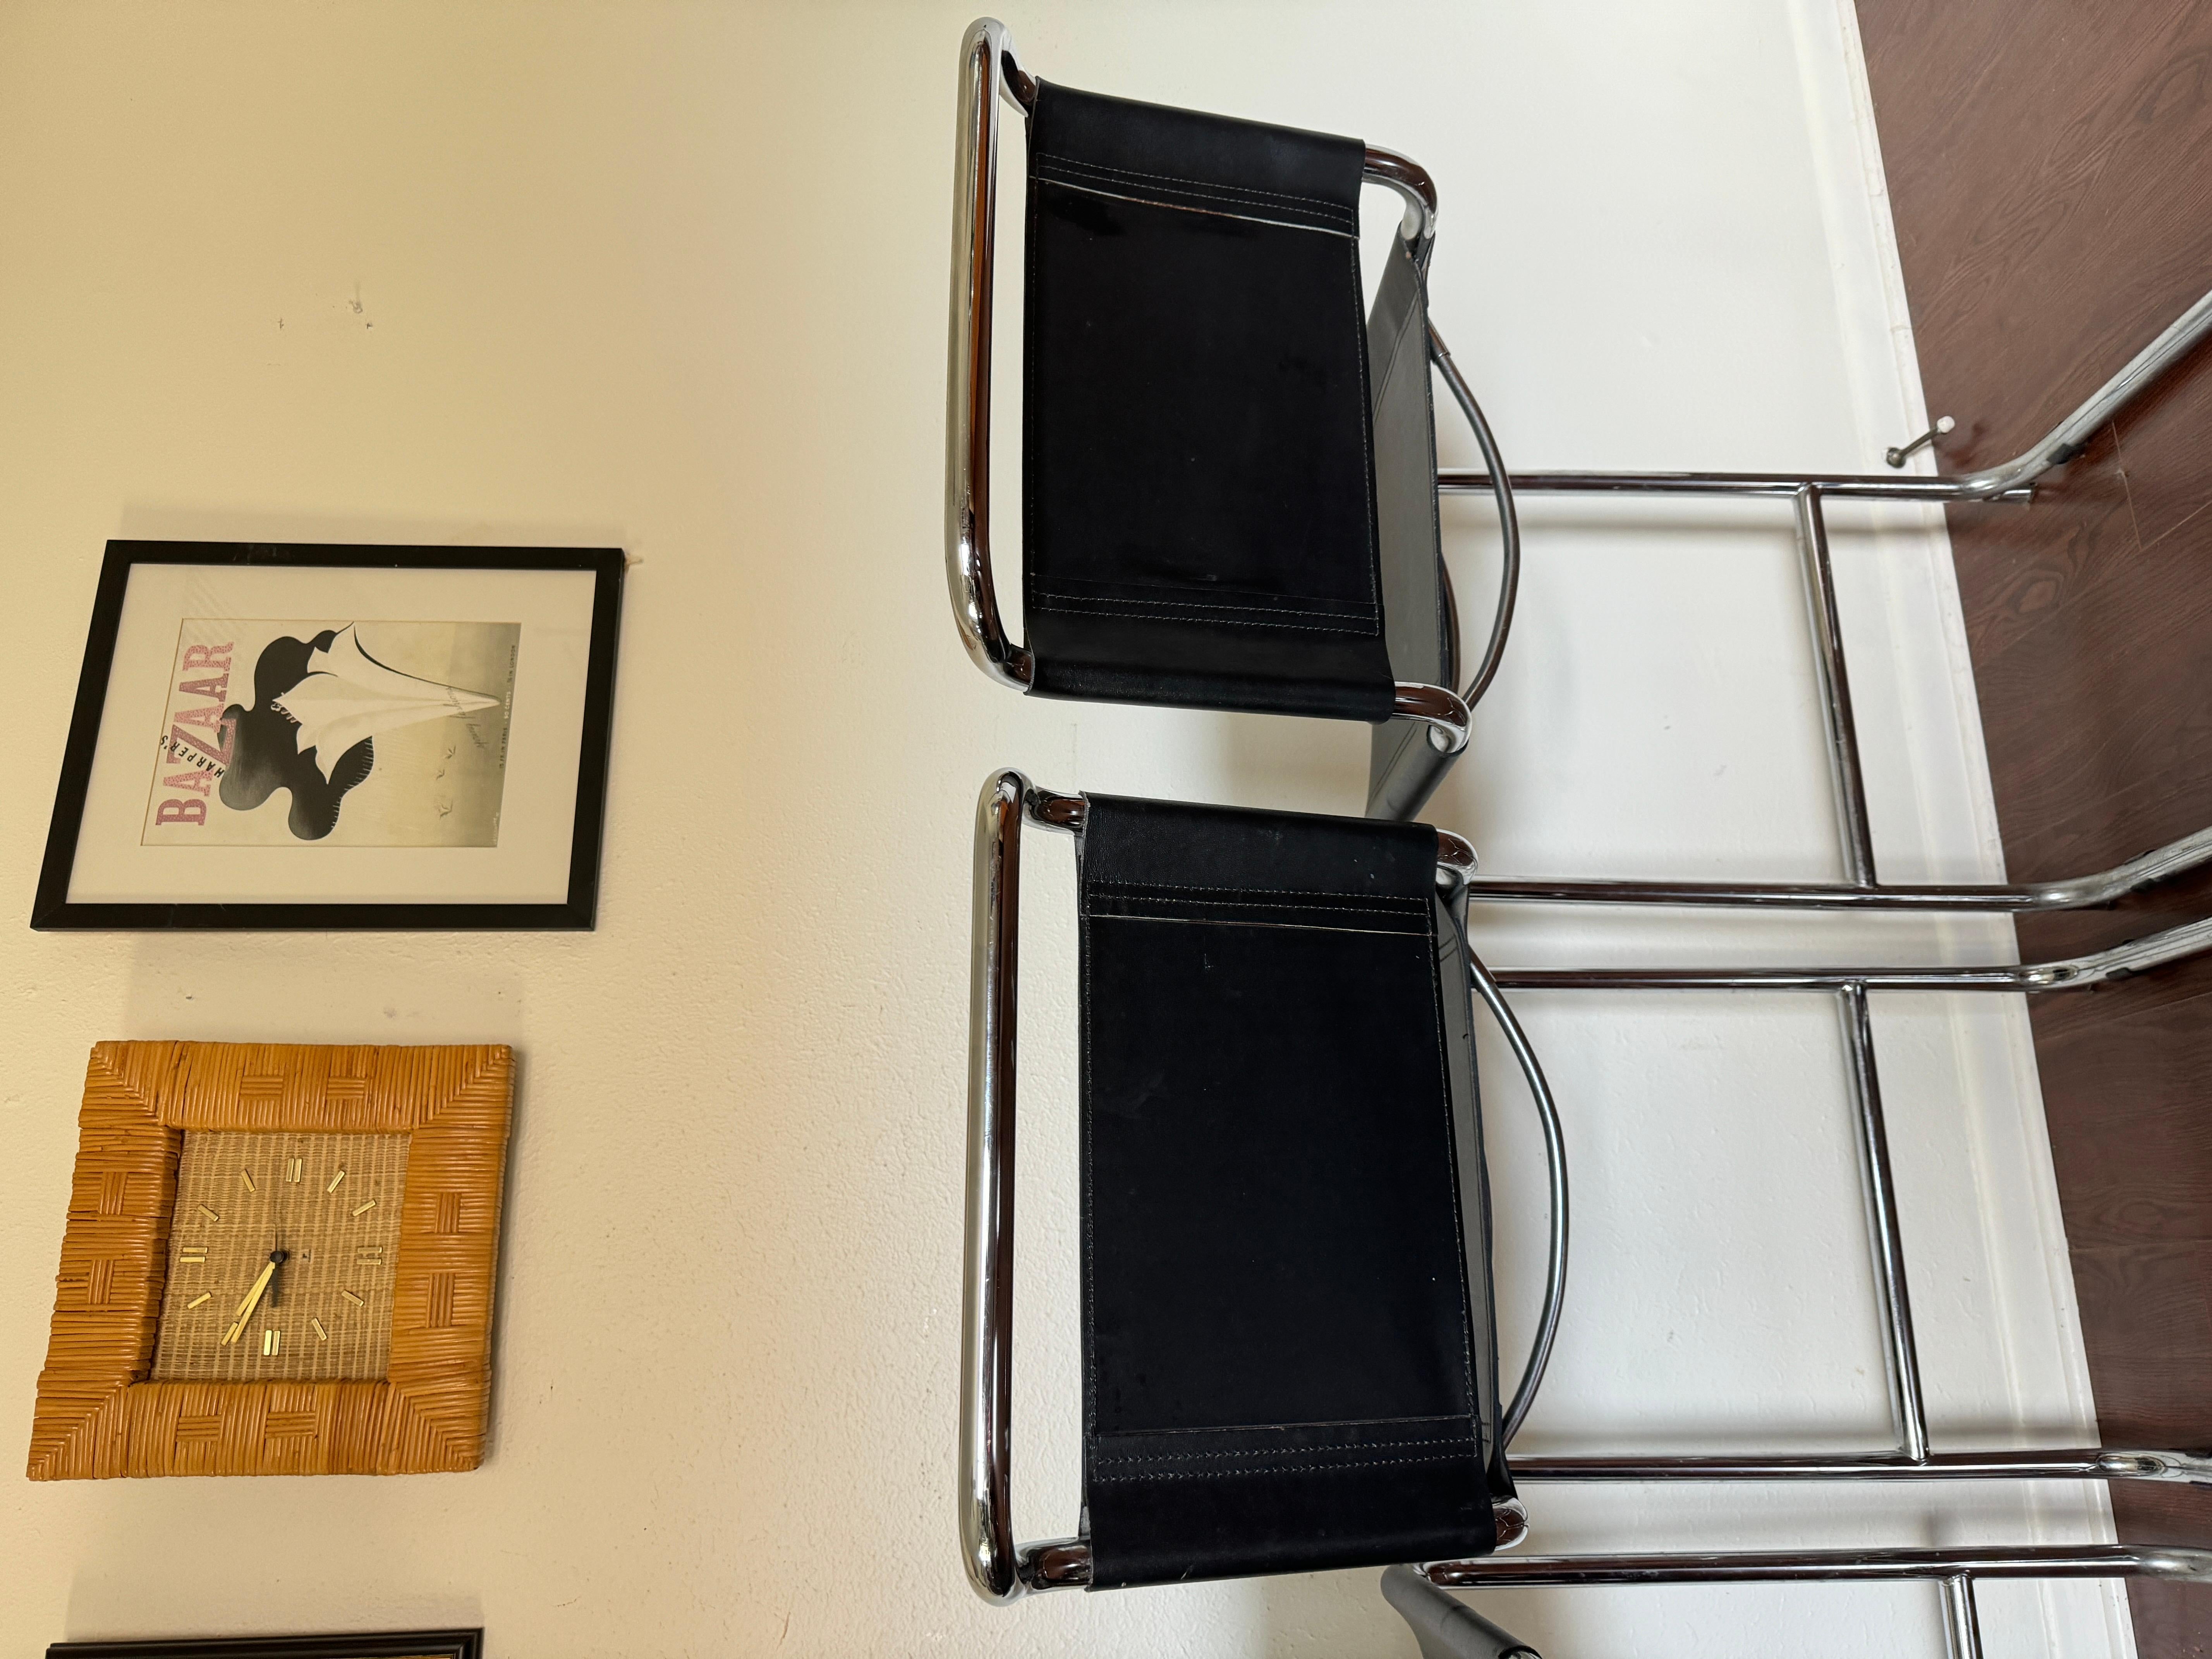 A set of 3 post modern bar stools by Mart Stam, circa 1980s. Chromed tubular steel structure, black leather seat and backrest. There is some minor wear on the leather but no rips or tears and chrome is in good condition. One stool is an inch shorter